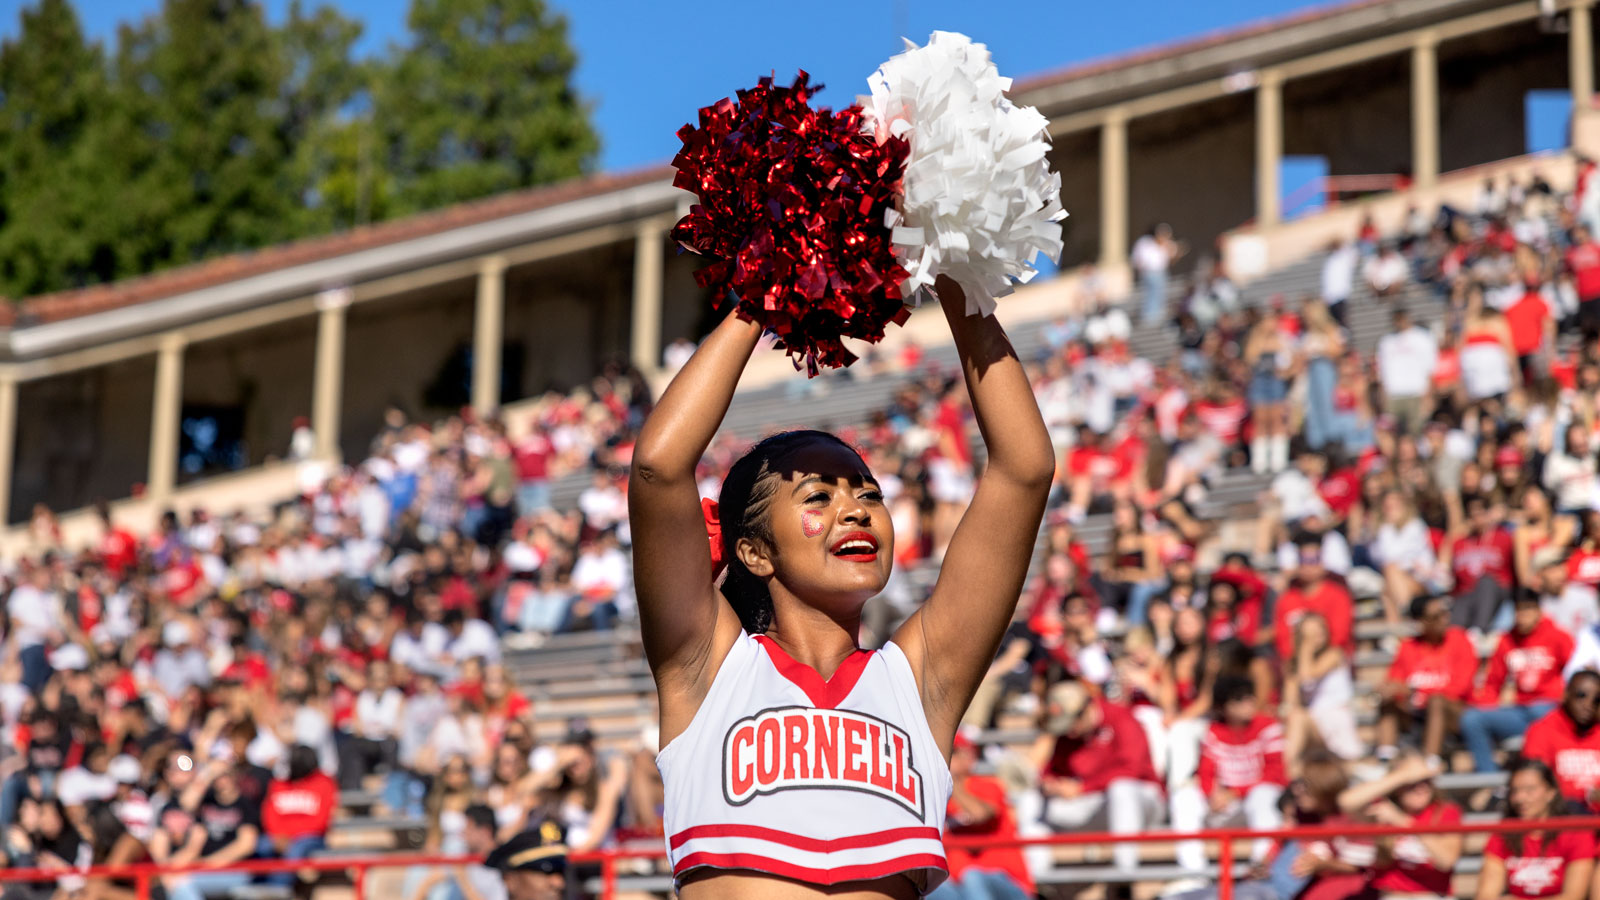 Cheerleader at the Homecoming game against Yale at Schoellkopf